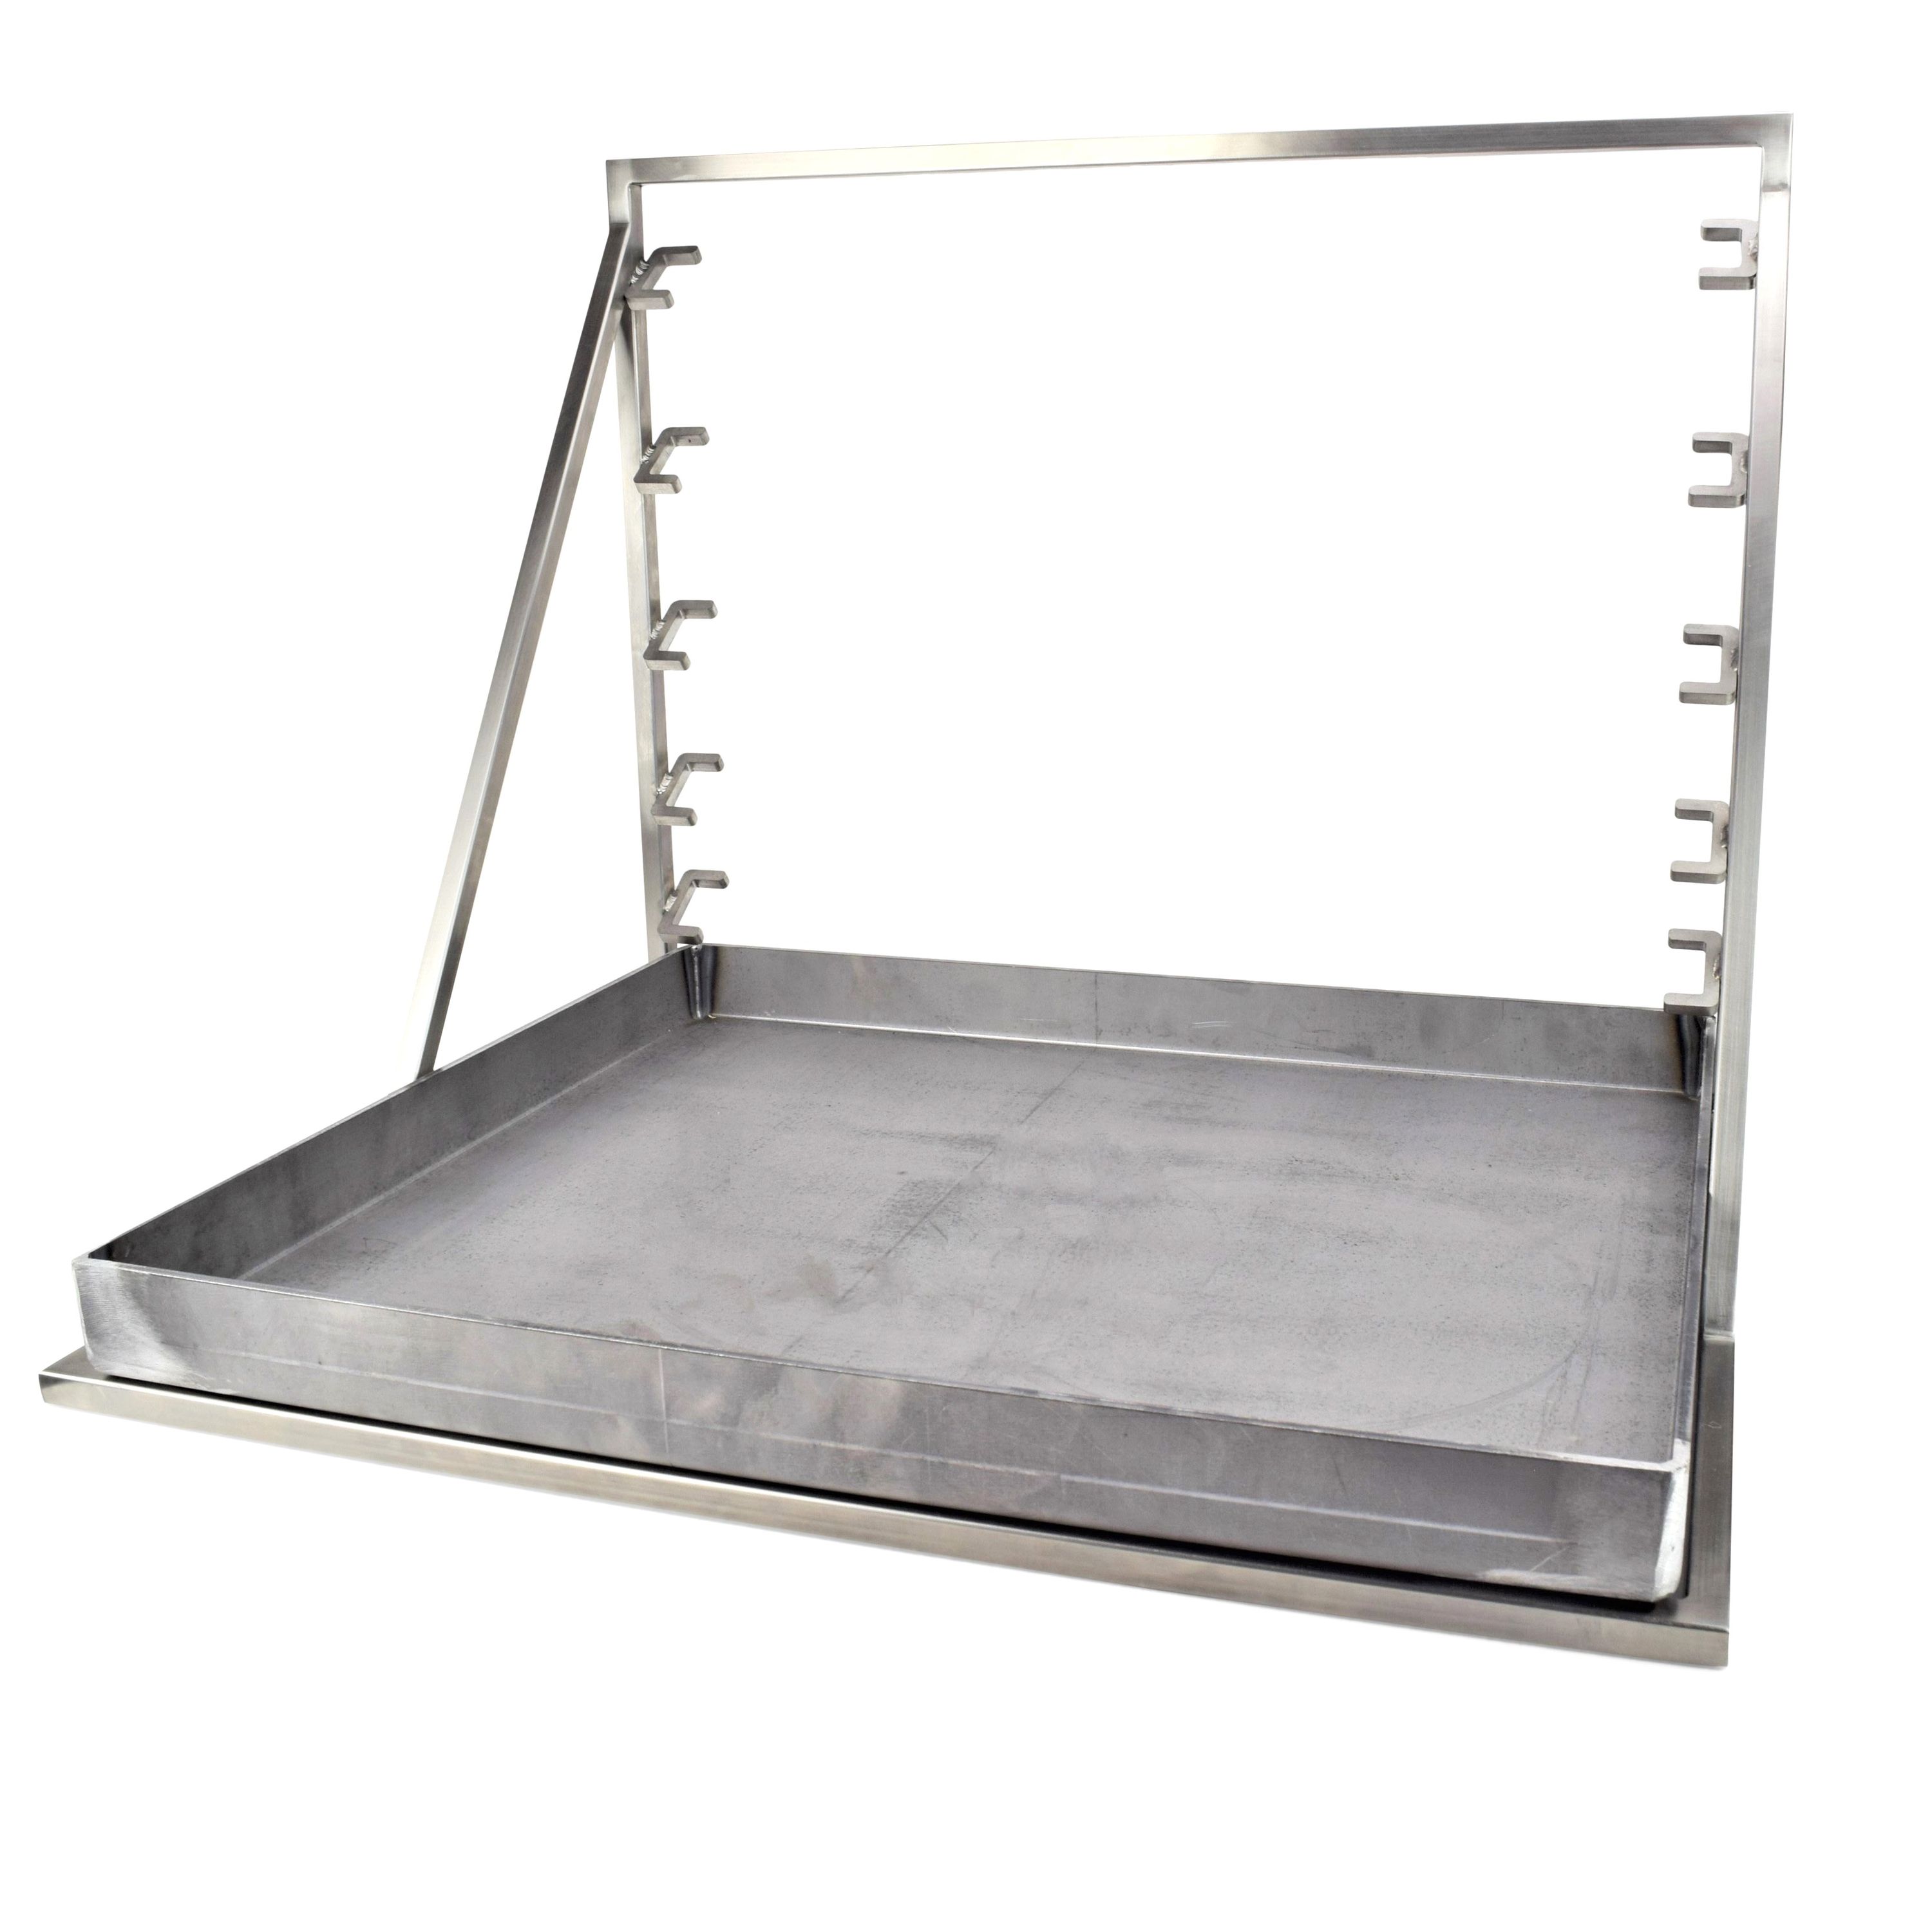 Suspended barbecue rack Made to measure from stainless steel